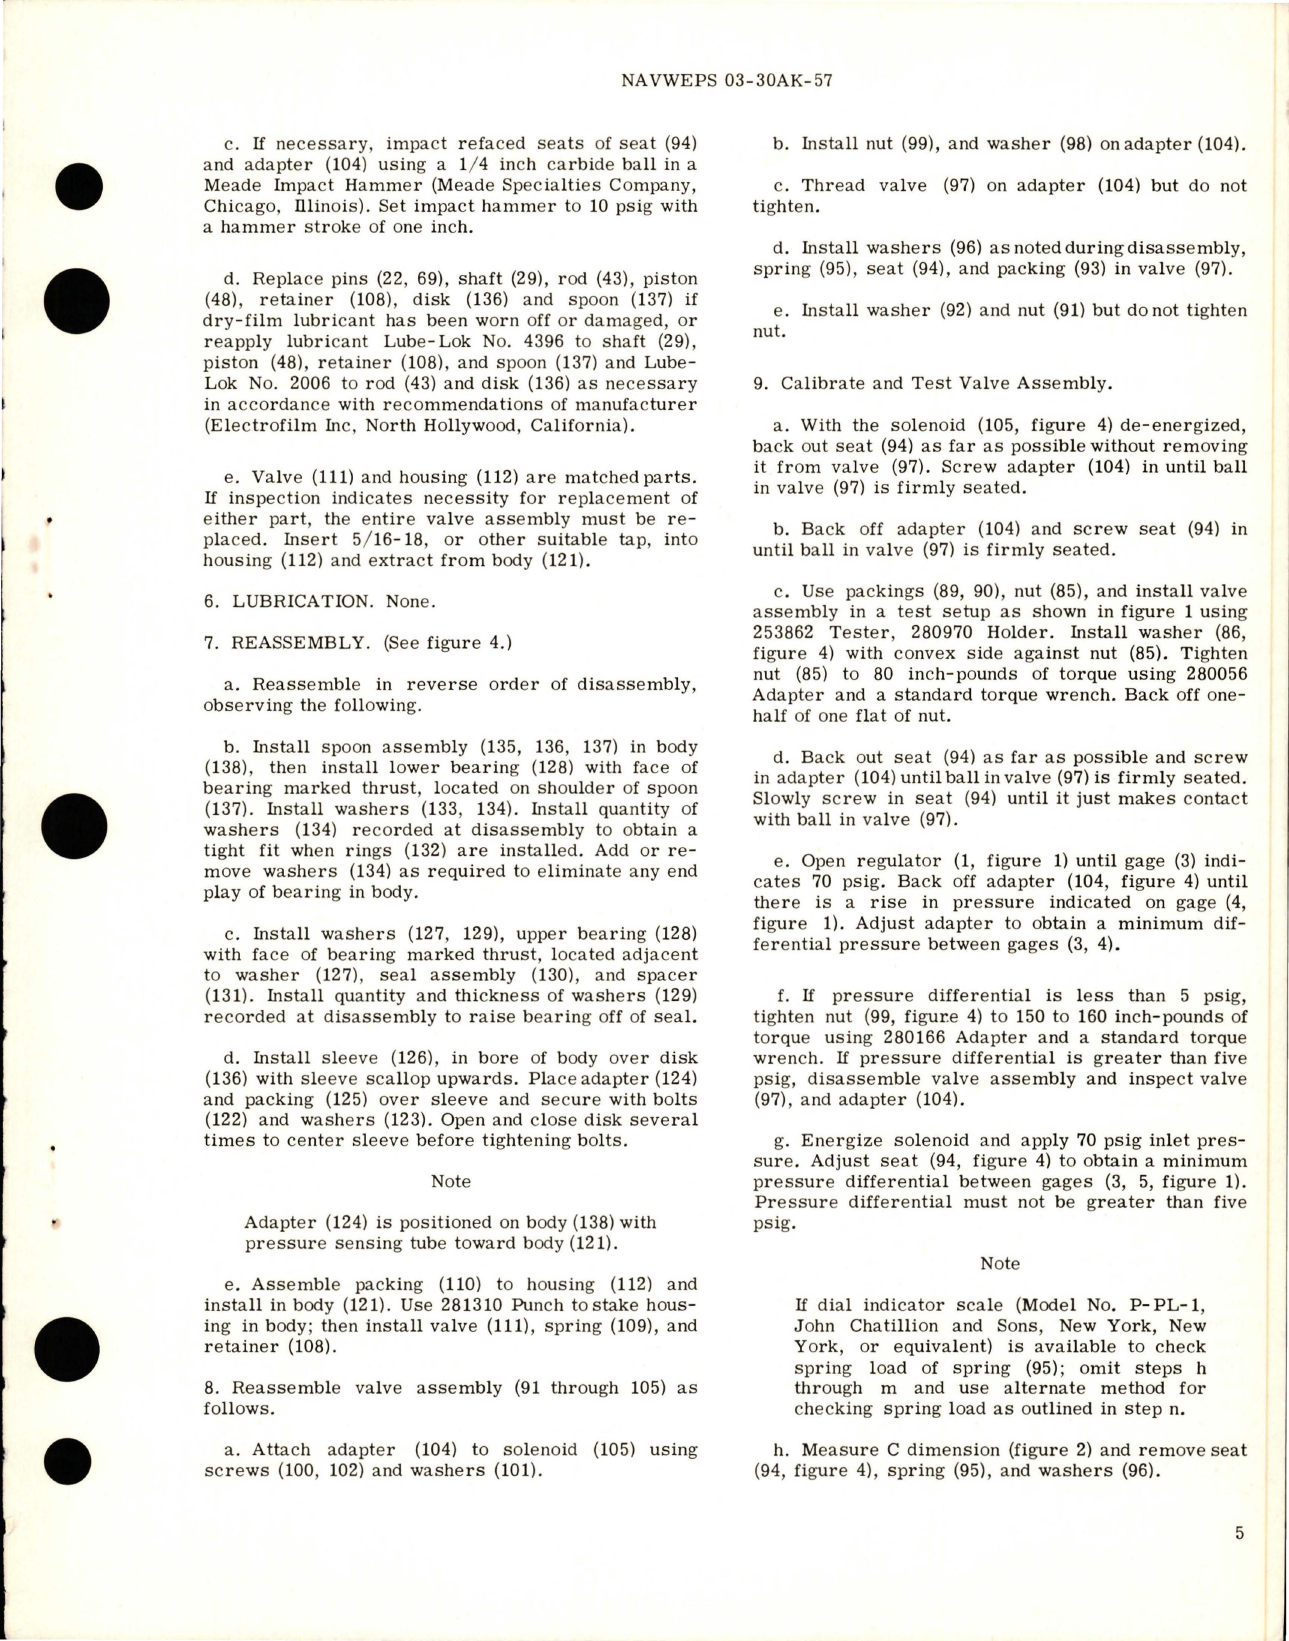 Sample page 7 from AirCorps Library document: Overhaul Instructions with Parts Breakdown for Shutoff Differential Pressure Regulator - Part 108420 - Model APR21-18-1